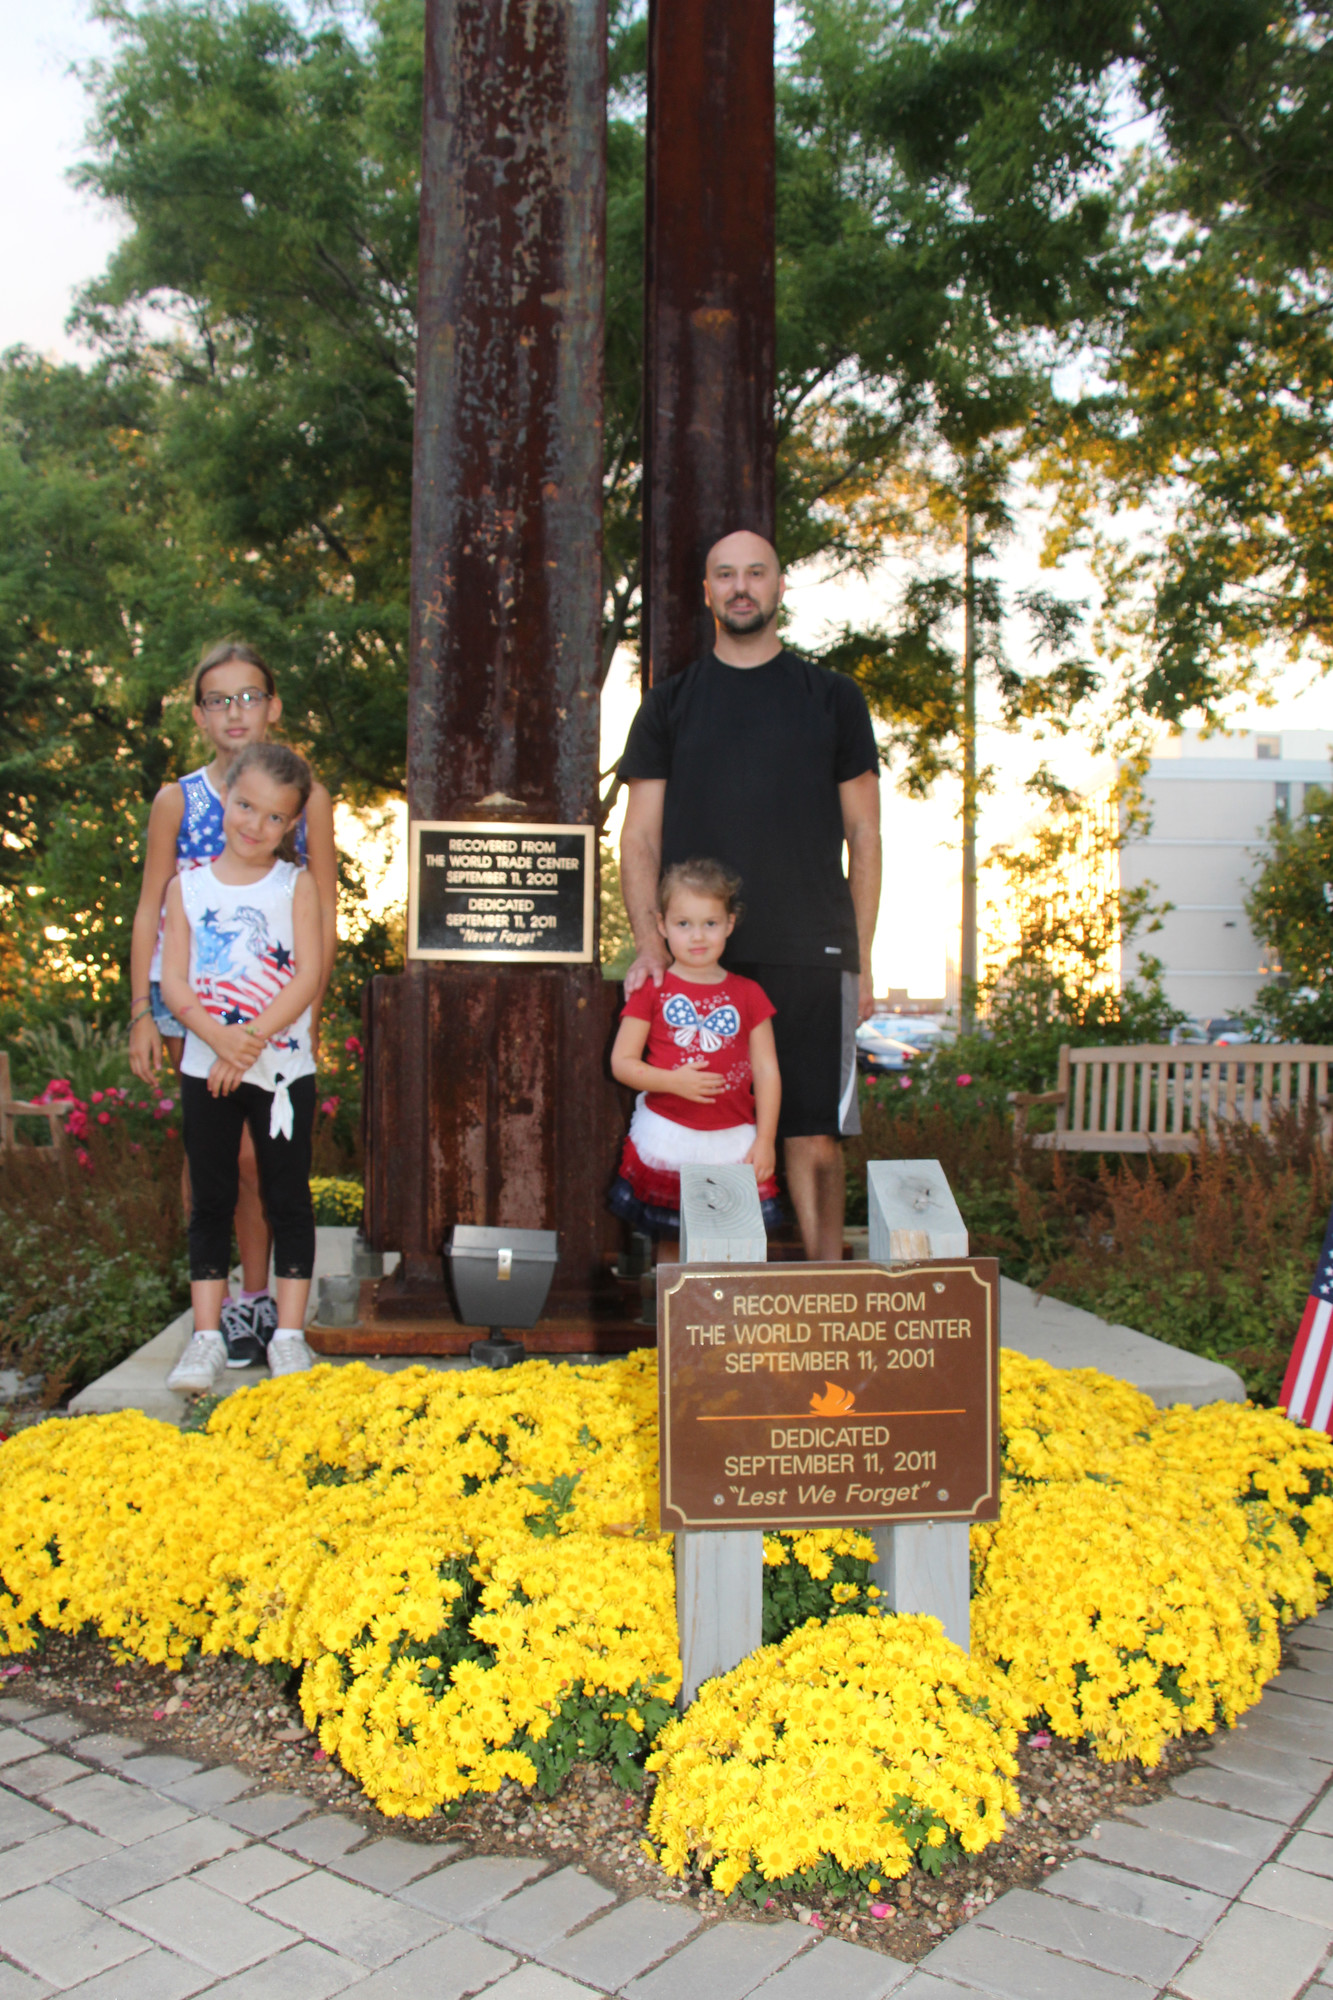 Brian Goldstein was working in a building next to the World Trade Center on 9/11, He escaped but he lost many of his friends that day.  He is pictured with his children: Emily, 11, left, Haley, 7, and Chloe, 3.